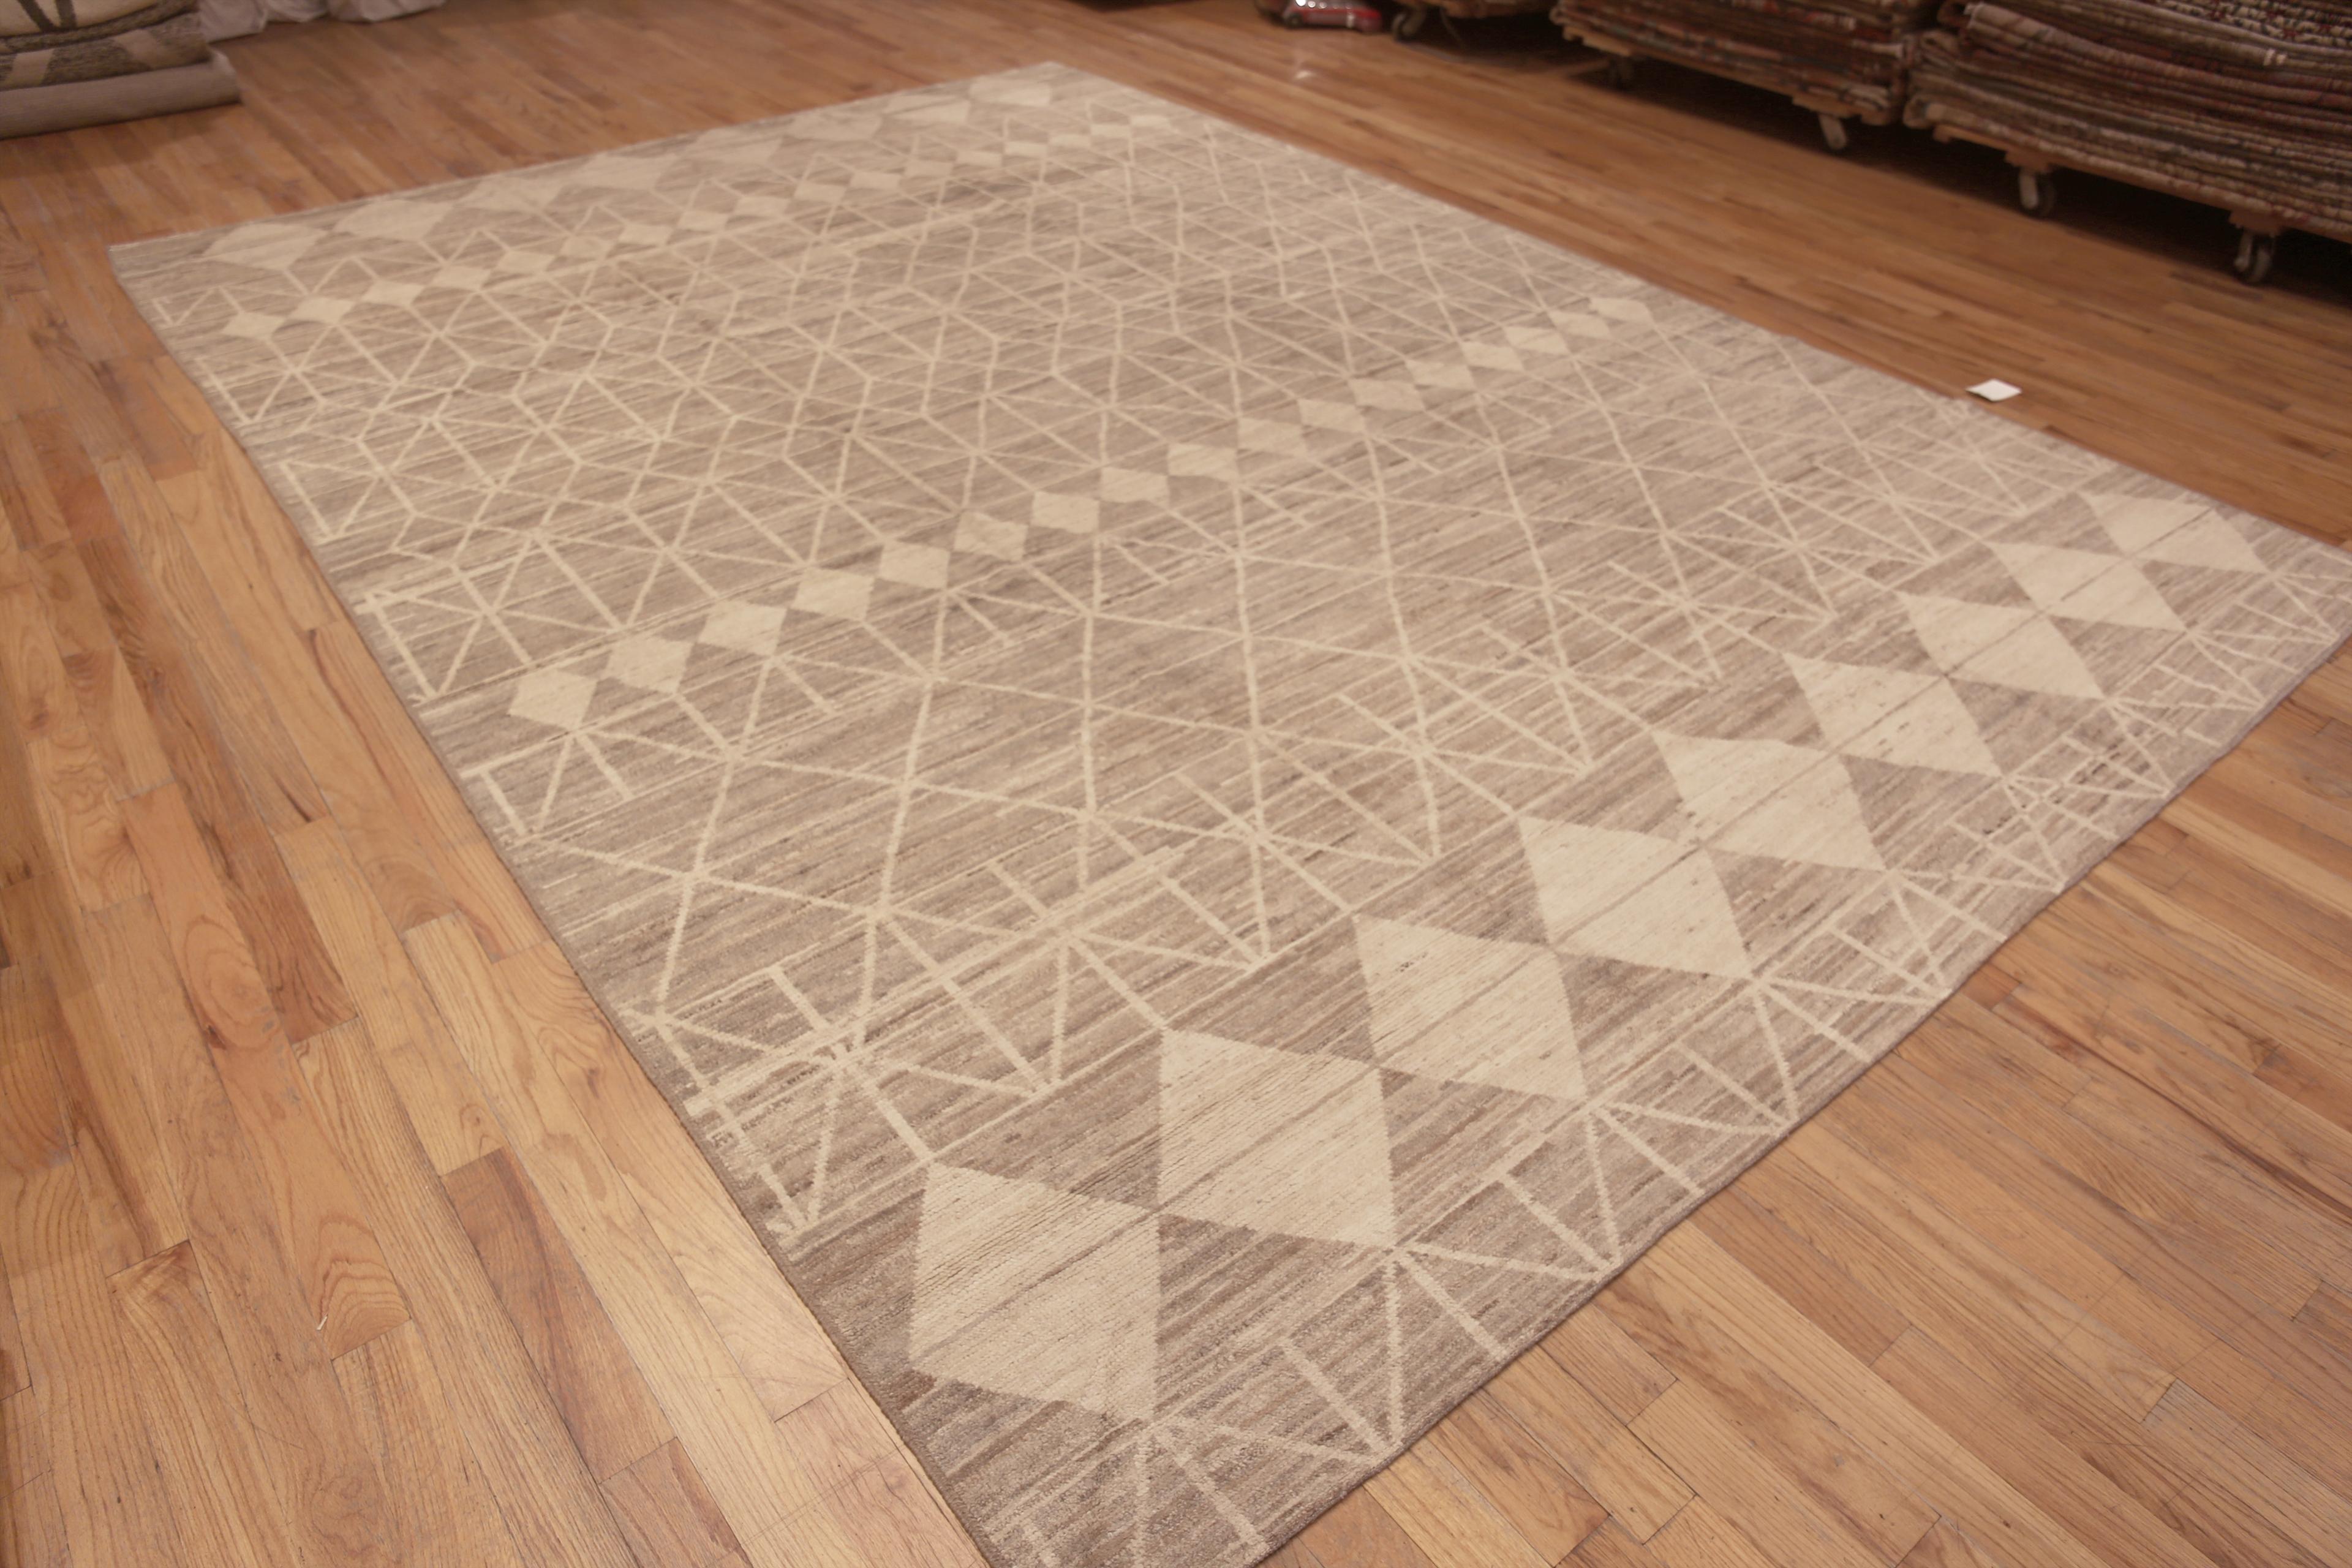 Beautifully Artistic Contemporary Handmade Tribal Geometric Neutral Color Modern Room Size Rug, Country of Origin: Central Asia, Circa Date: Modern Rug 